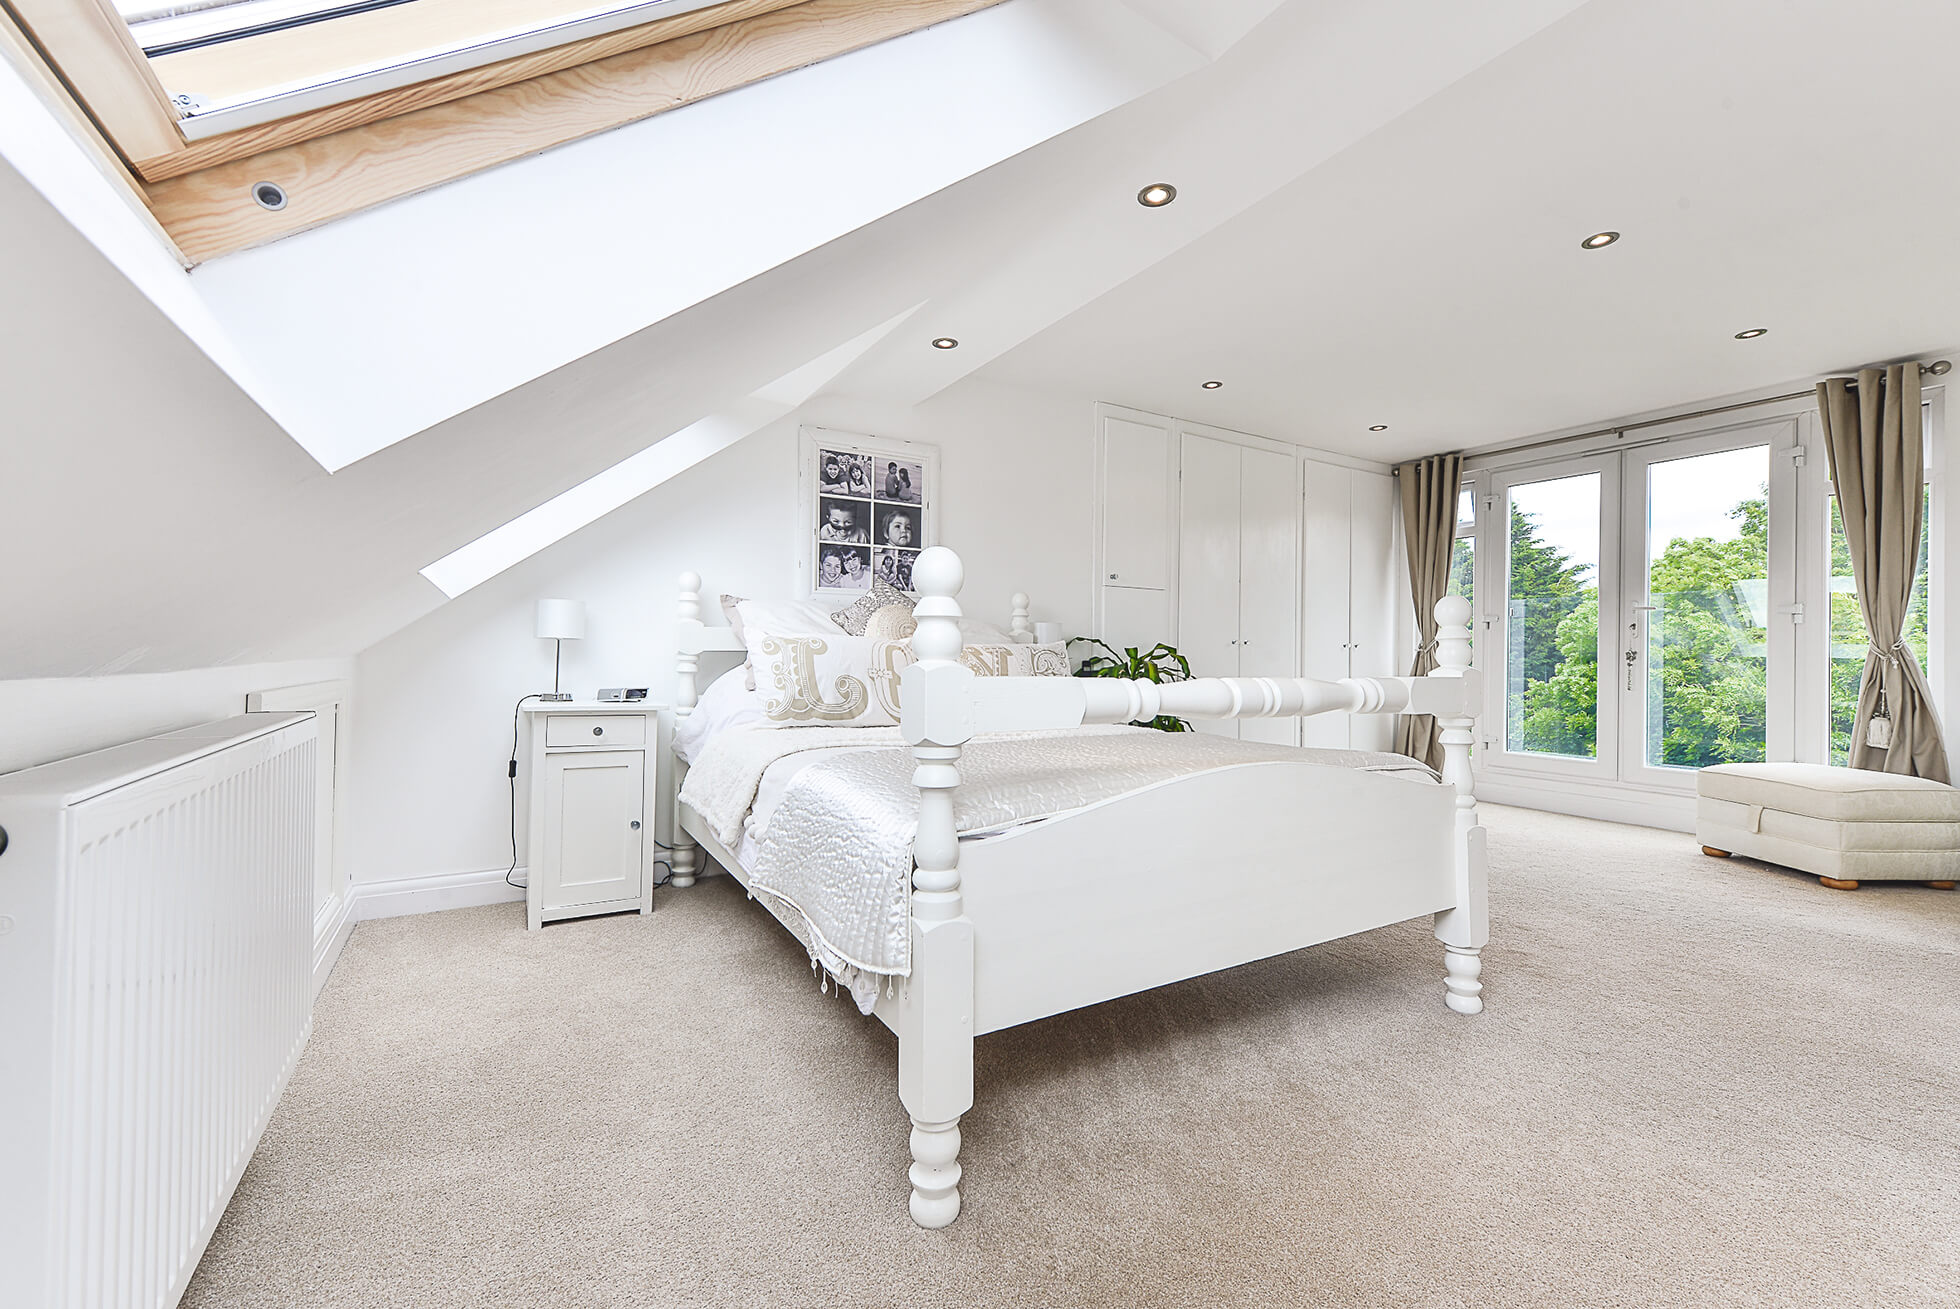 Do you have a question about converting your Loft in Holwell? Here are the most popular questions asked by our clients.